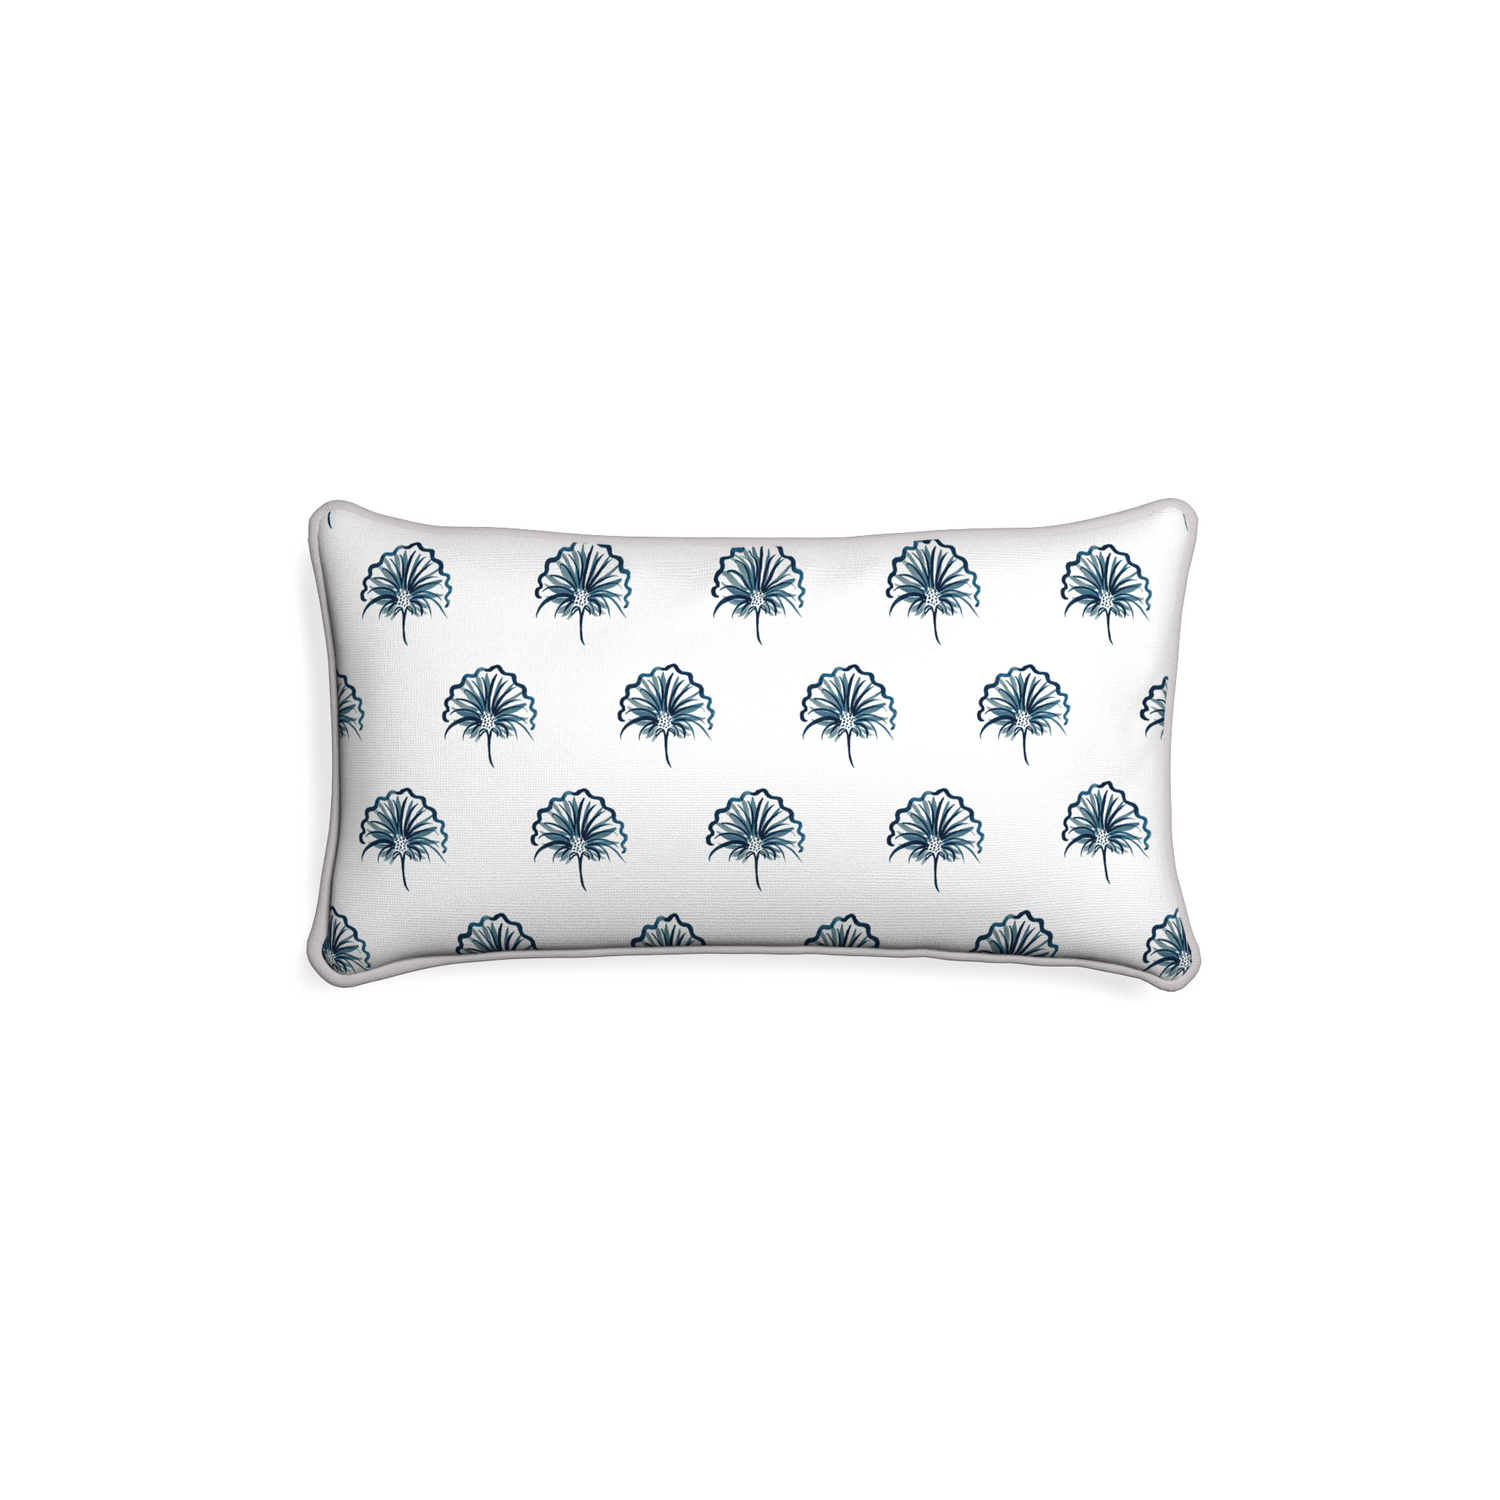 Petite-lumbar penelope midnight custom floral navypillow with pebble piping on white background